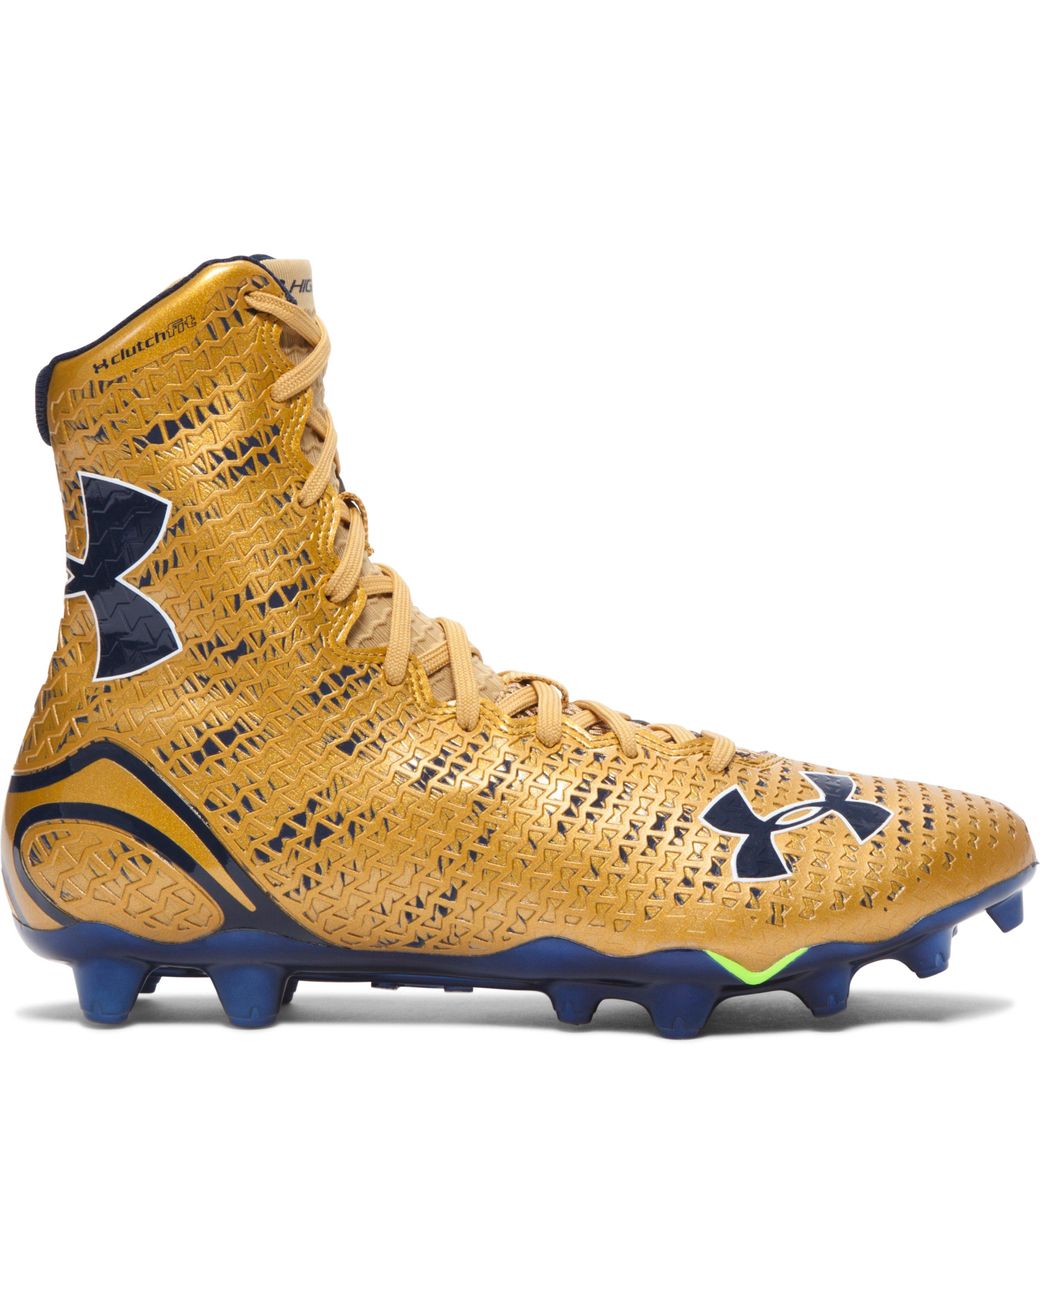 Under Armour Men's Ua Highlight Football Cleats — Limited Edition in  Metallic for Men | Lyst